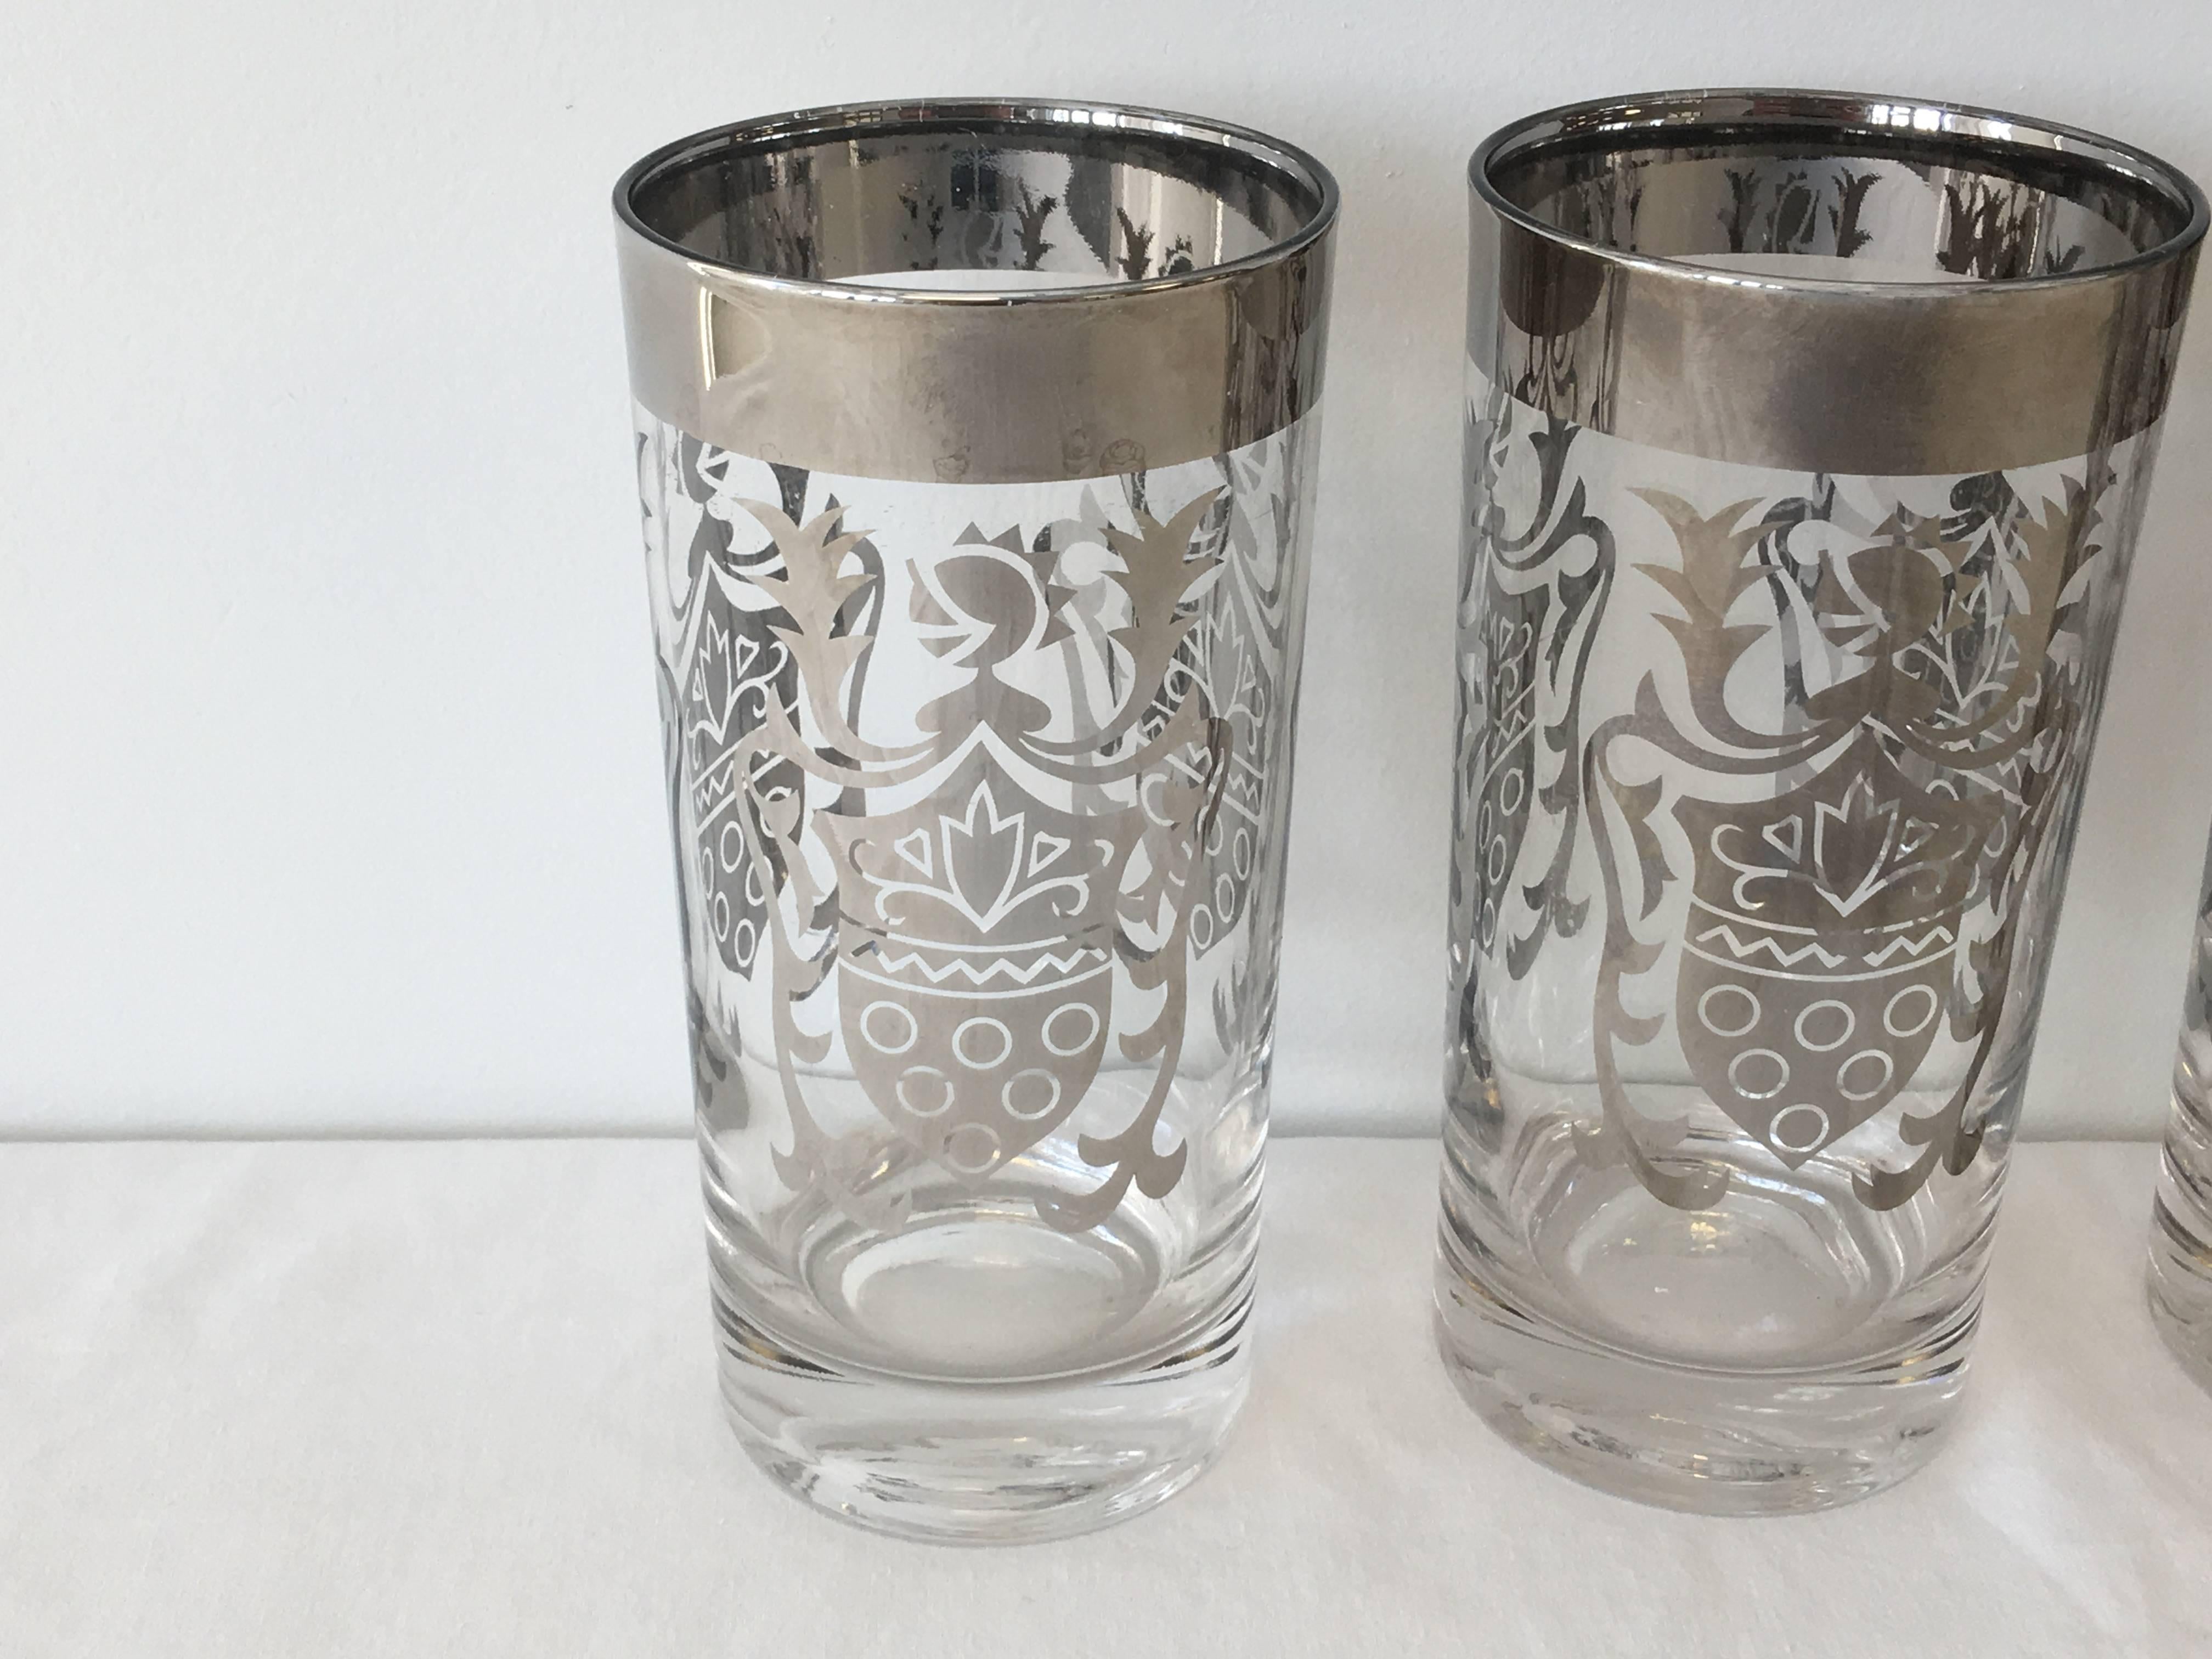 Offered is an immaculate set of four, Dorothy Thorpe cocktail glasses with platinum crest motifs.